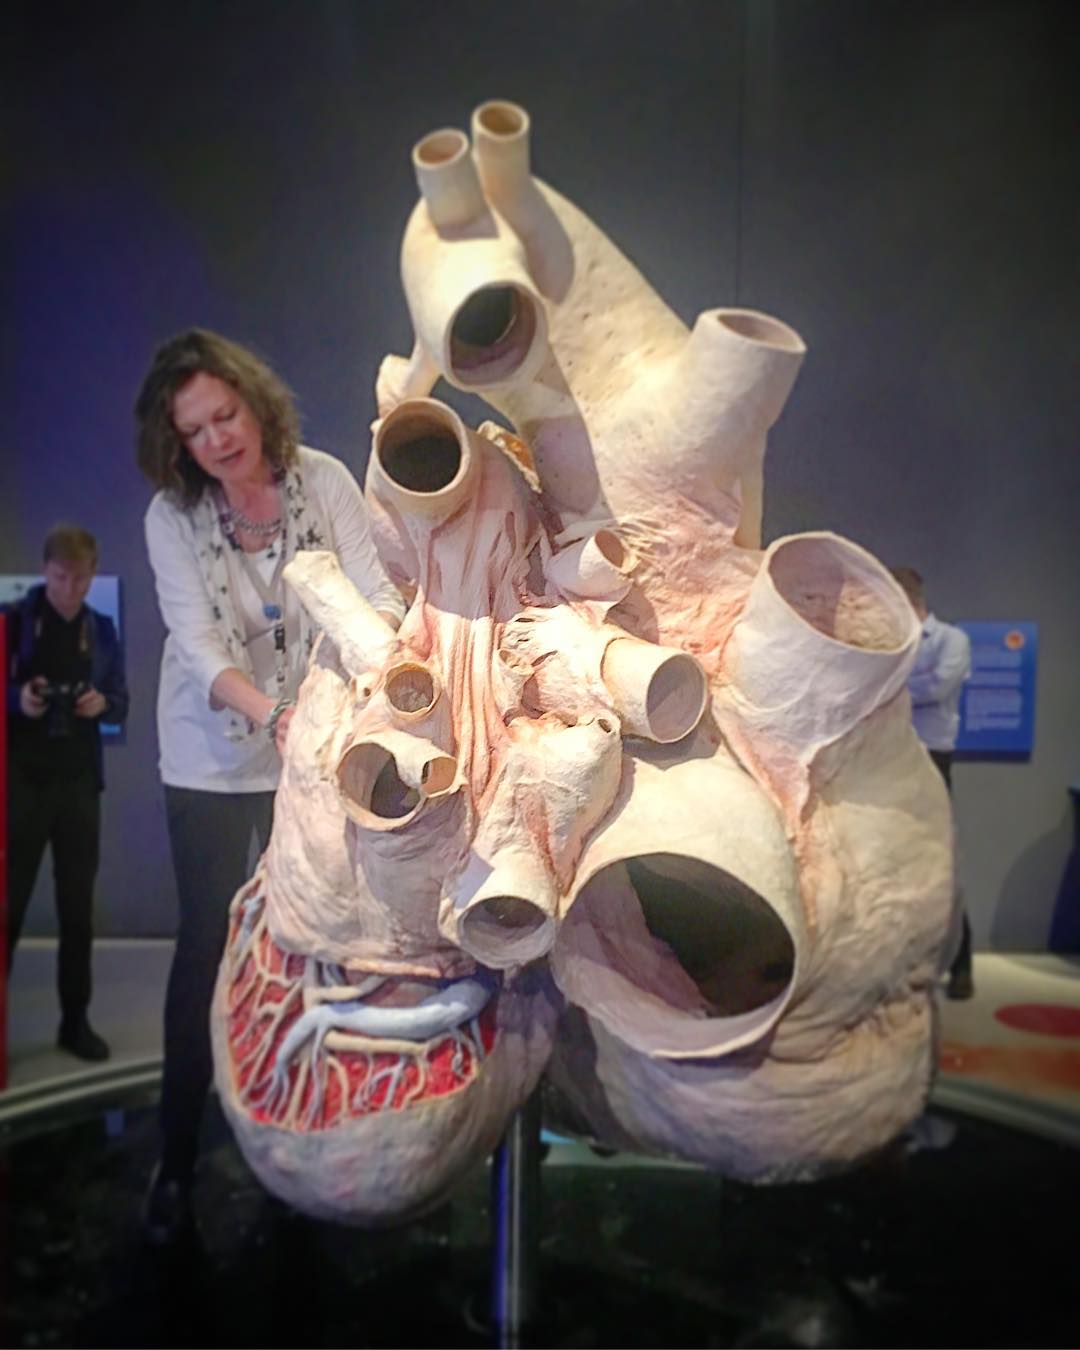 Different Size: This is a blue whale heart! It weighs around 400 lb and can be up to 5 feet long in size. 